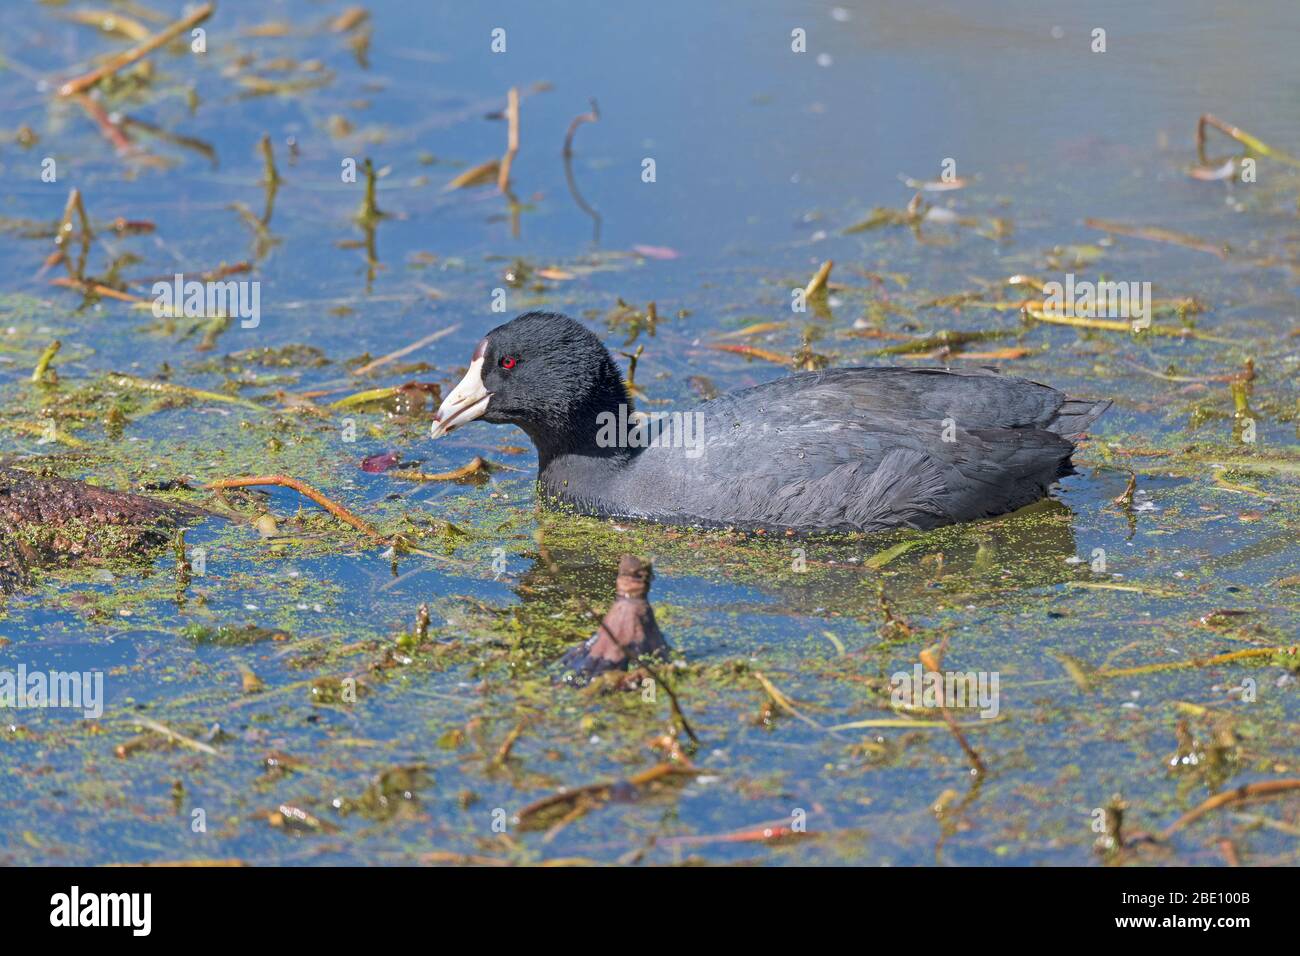 American Coot Swimming in a Wetland Pond in Brazos Bend State Park in Texas Stock Photo